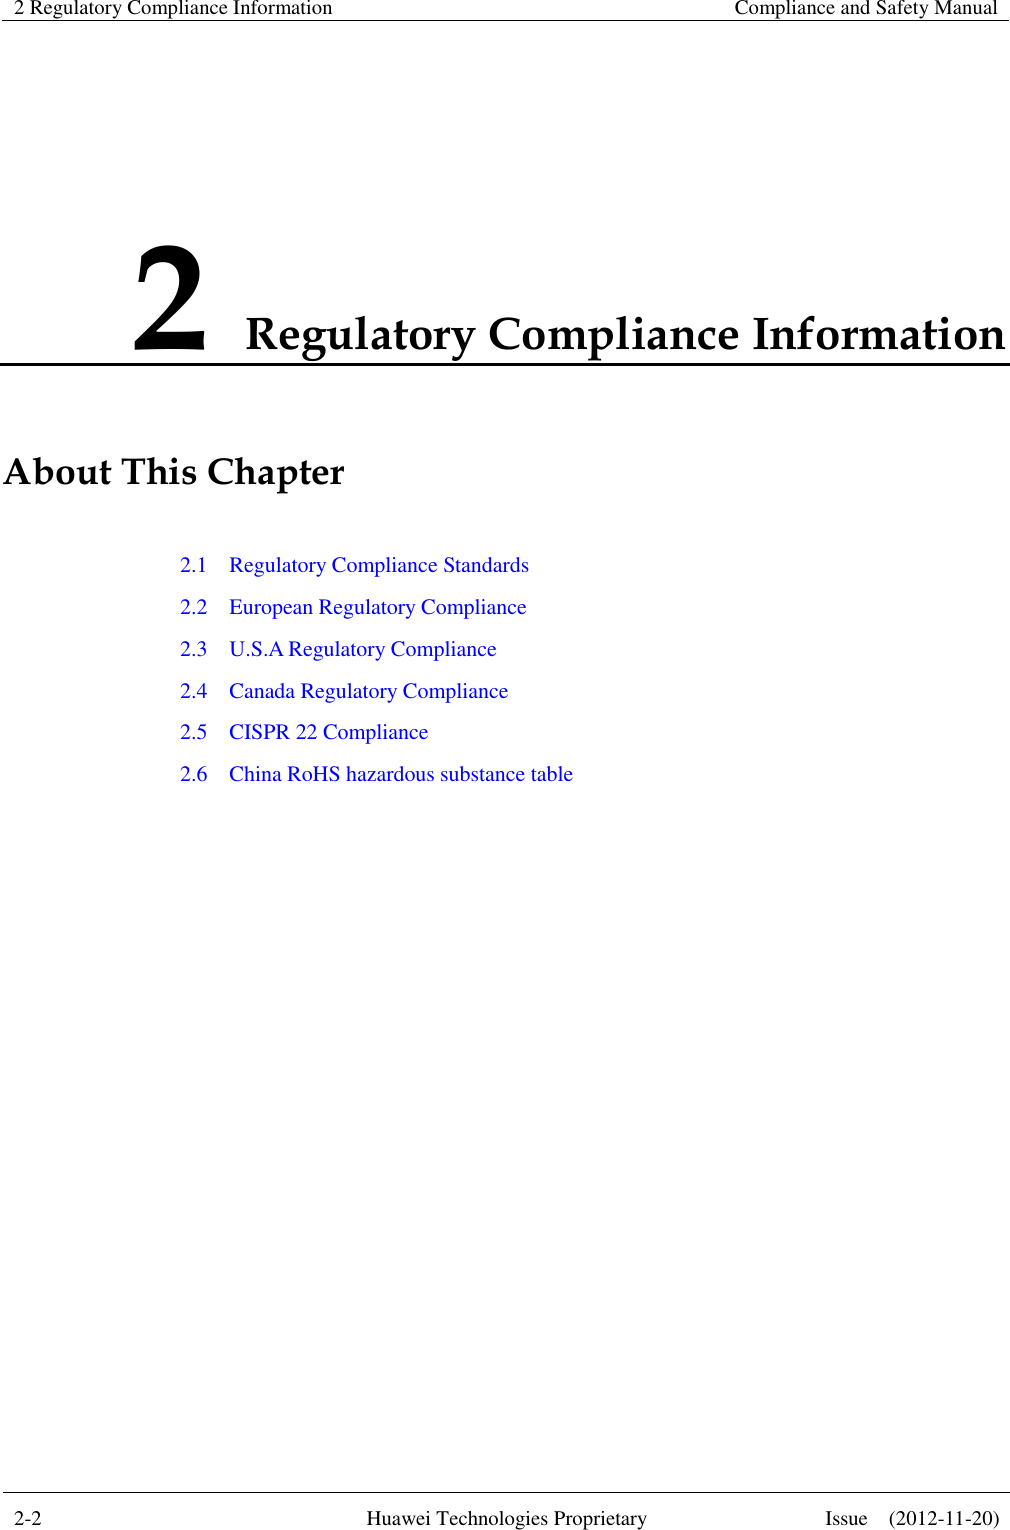 2 Regulatory Compliance Information   Compliance and Safety Manual  2-2  Huawei Technologies Proprietary  Issue    (2012-11-20)  2 Regulatory Compliance Information About This Chapter 2.1    Regulatory Compliance Standards 2.2    European Regulatory Compliance 2.3    U.S.A Regulatory Compliance 2.4    Canada Regulatory Compliance 2.5    CISPR 22 Compliance 2.6    China RoHS hazardous substance table  